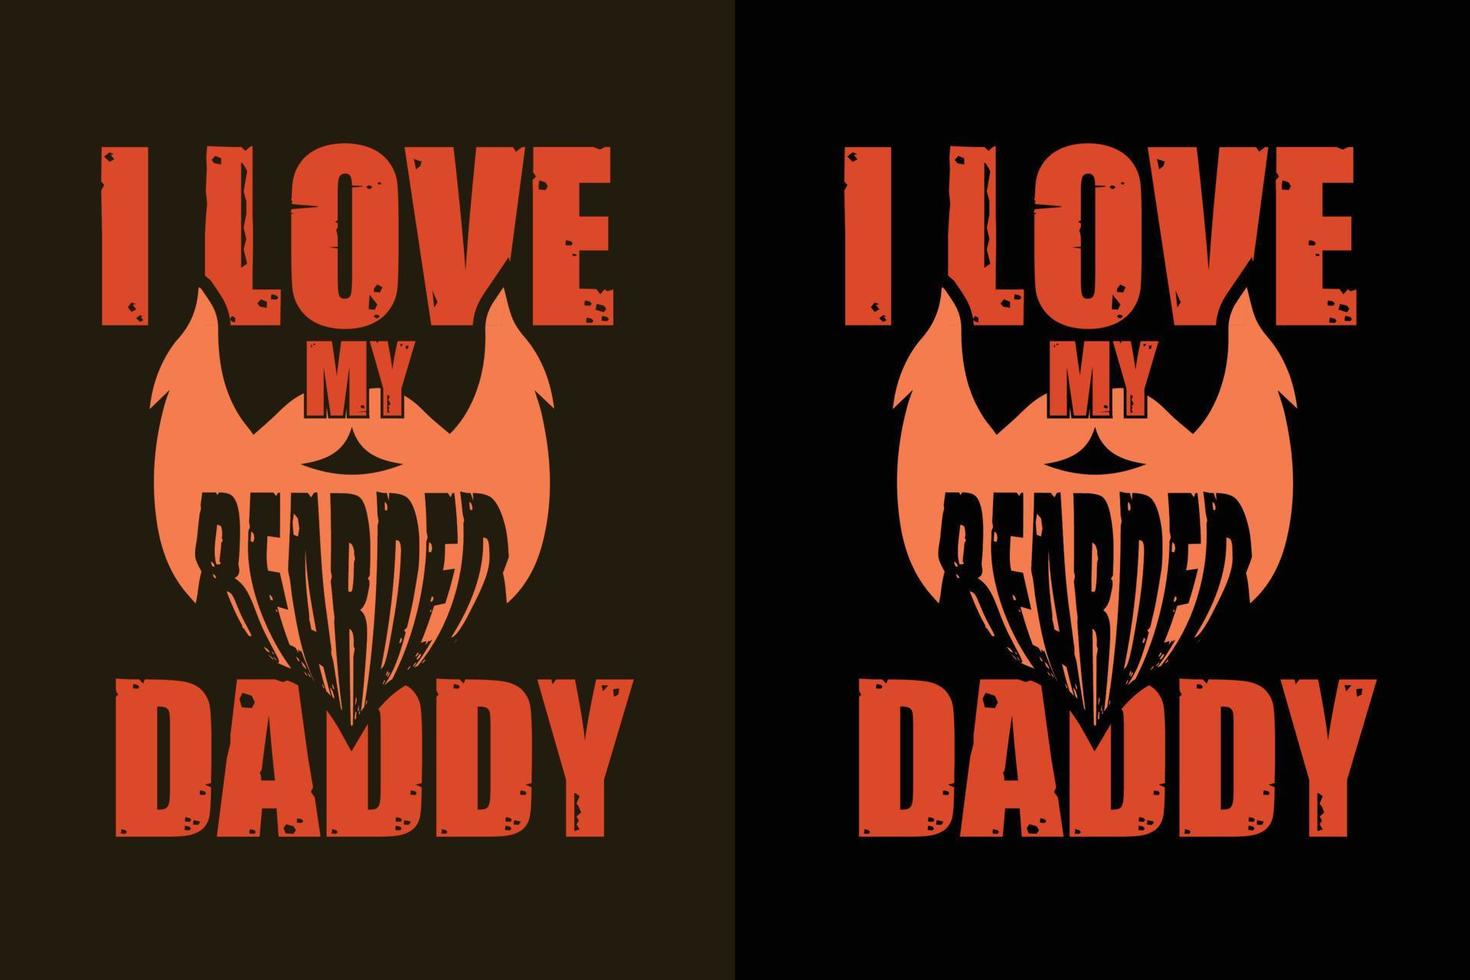 I love my bearded daddy father's day t shirt design quotes vector